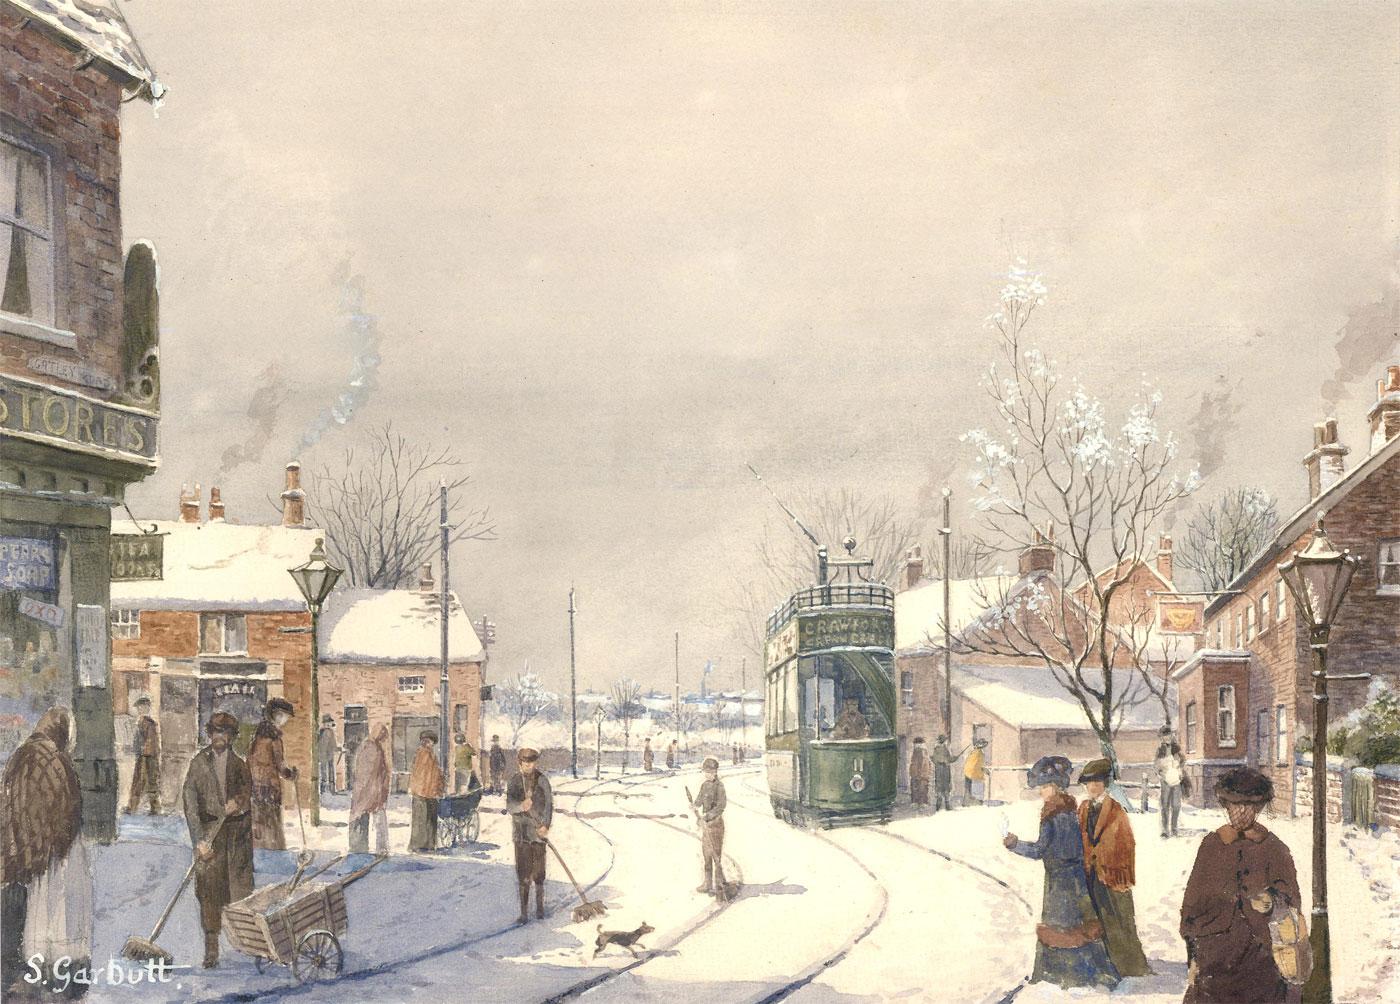 A charming 20th century watercolour of an Edwardian street covered in snow by Stephen Garbutt. A number of figures can be seen in winter clothing continuing their daily routines, while a group of local take it upon themselves to clearing the tram